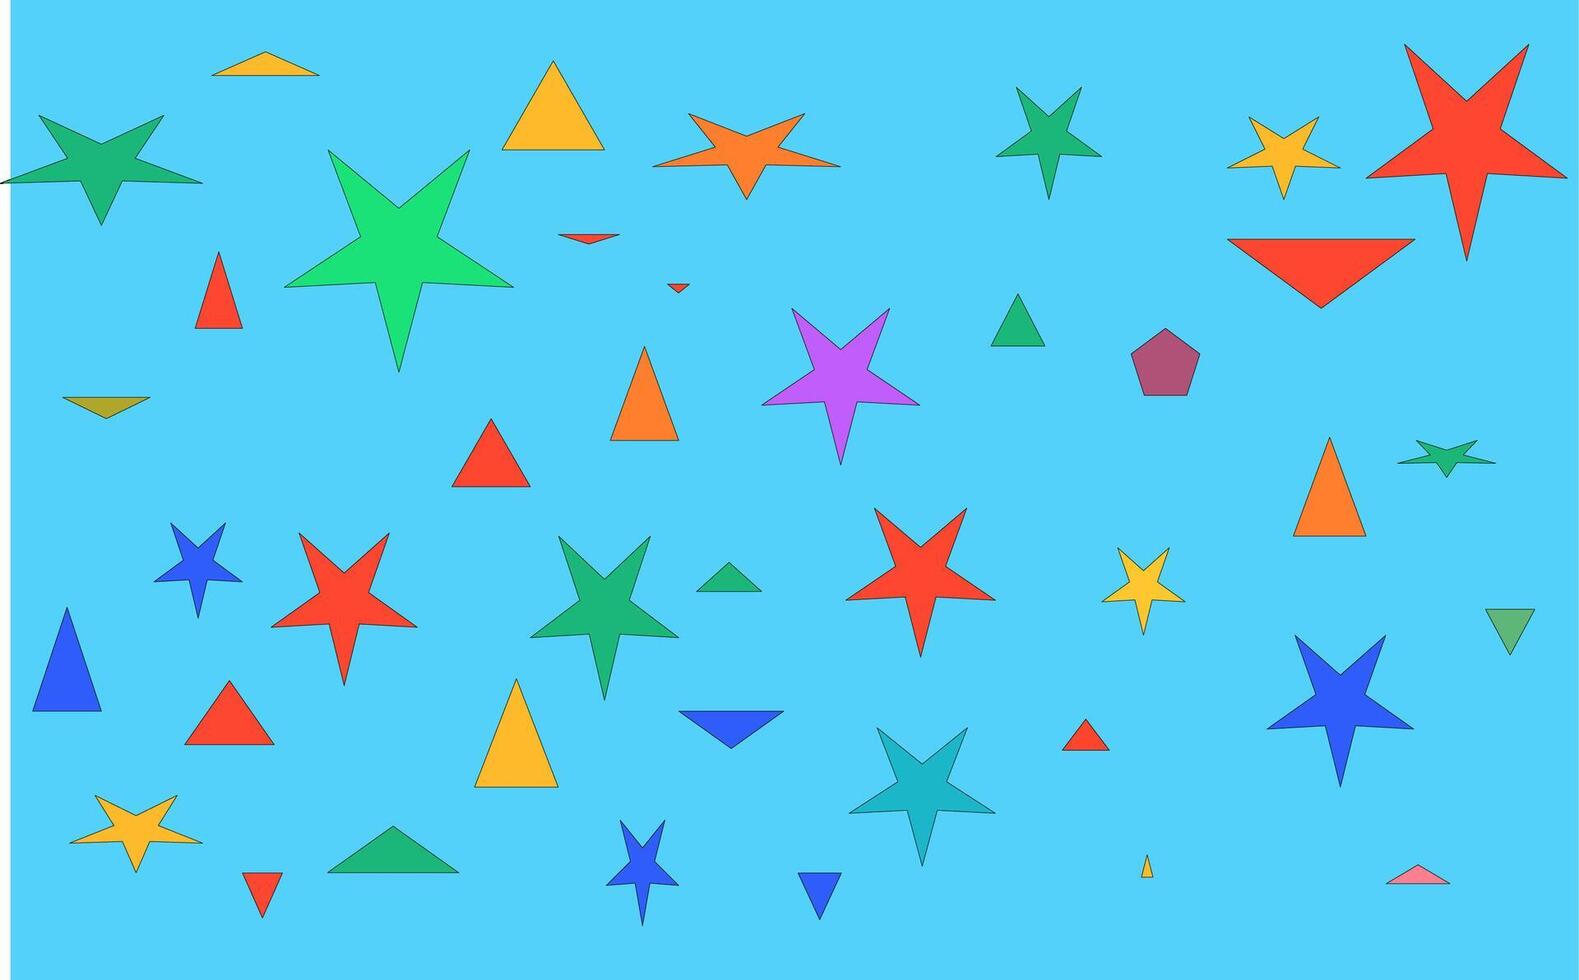 a colorful pattern of stars and triangles on a blue background vector